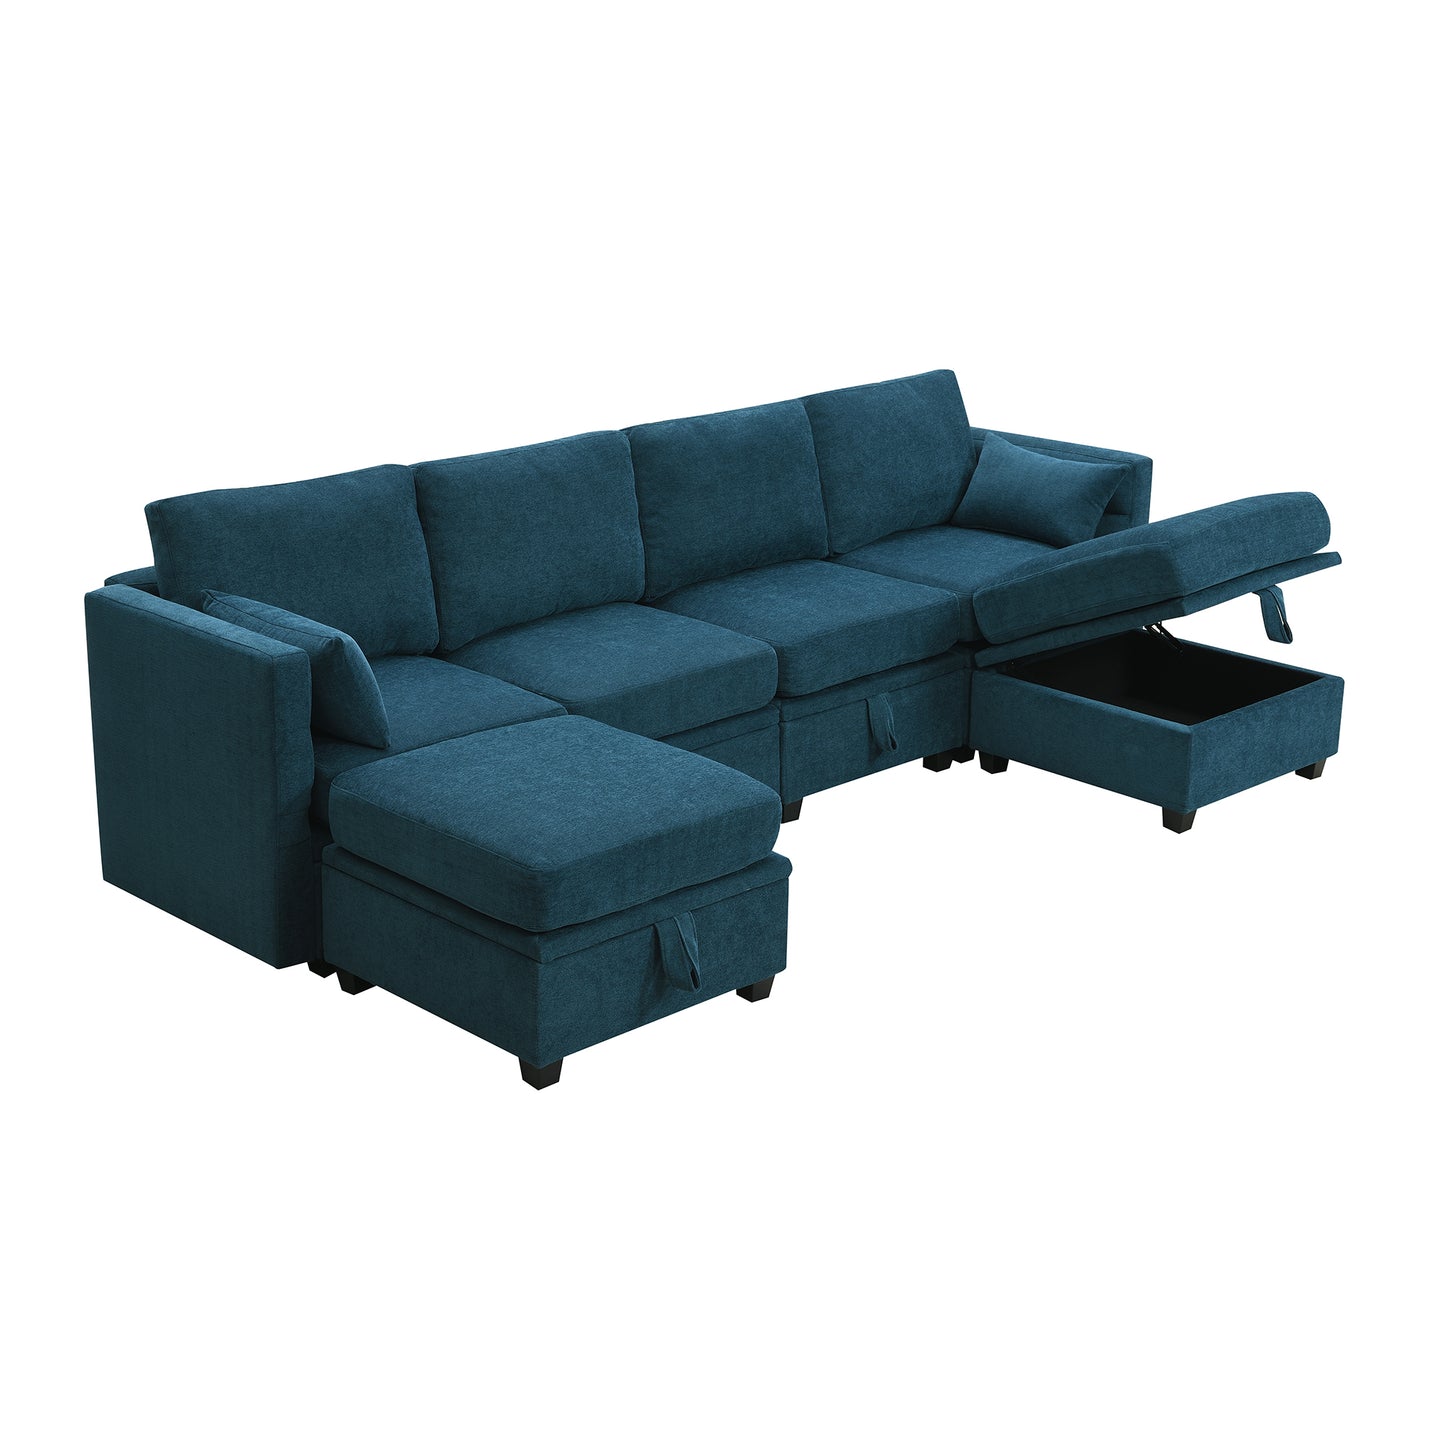 Chenille U-Shaped Modular Sectional Sofa with Adjustable Armrests, Backrests, and Storage Seats